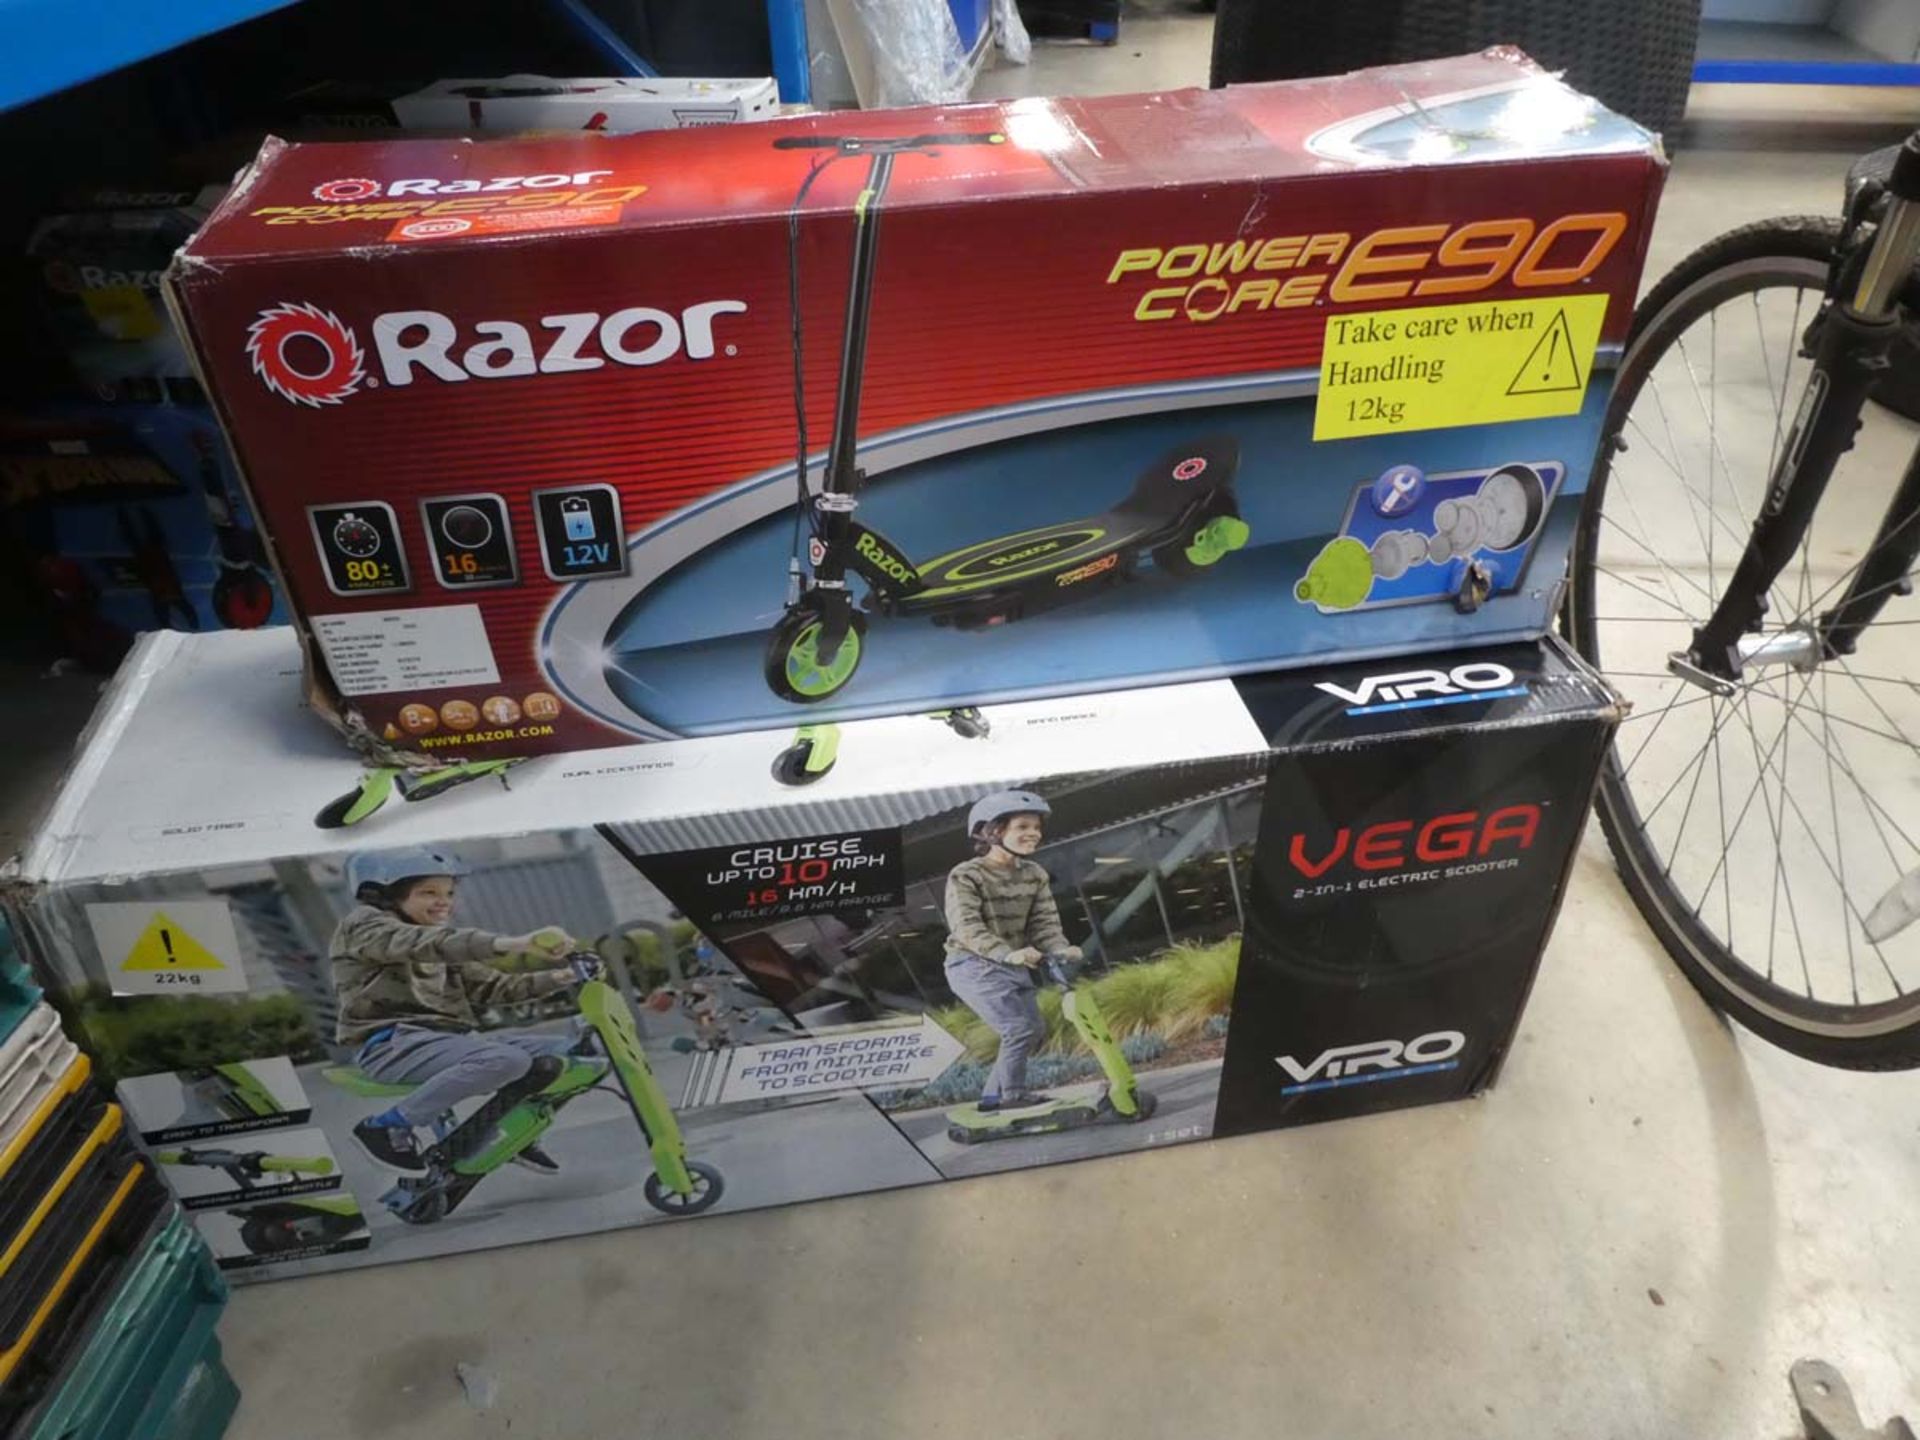 Vega boxed electric scooter and a Razor boxed electric scooter